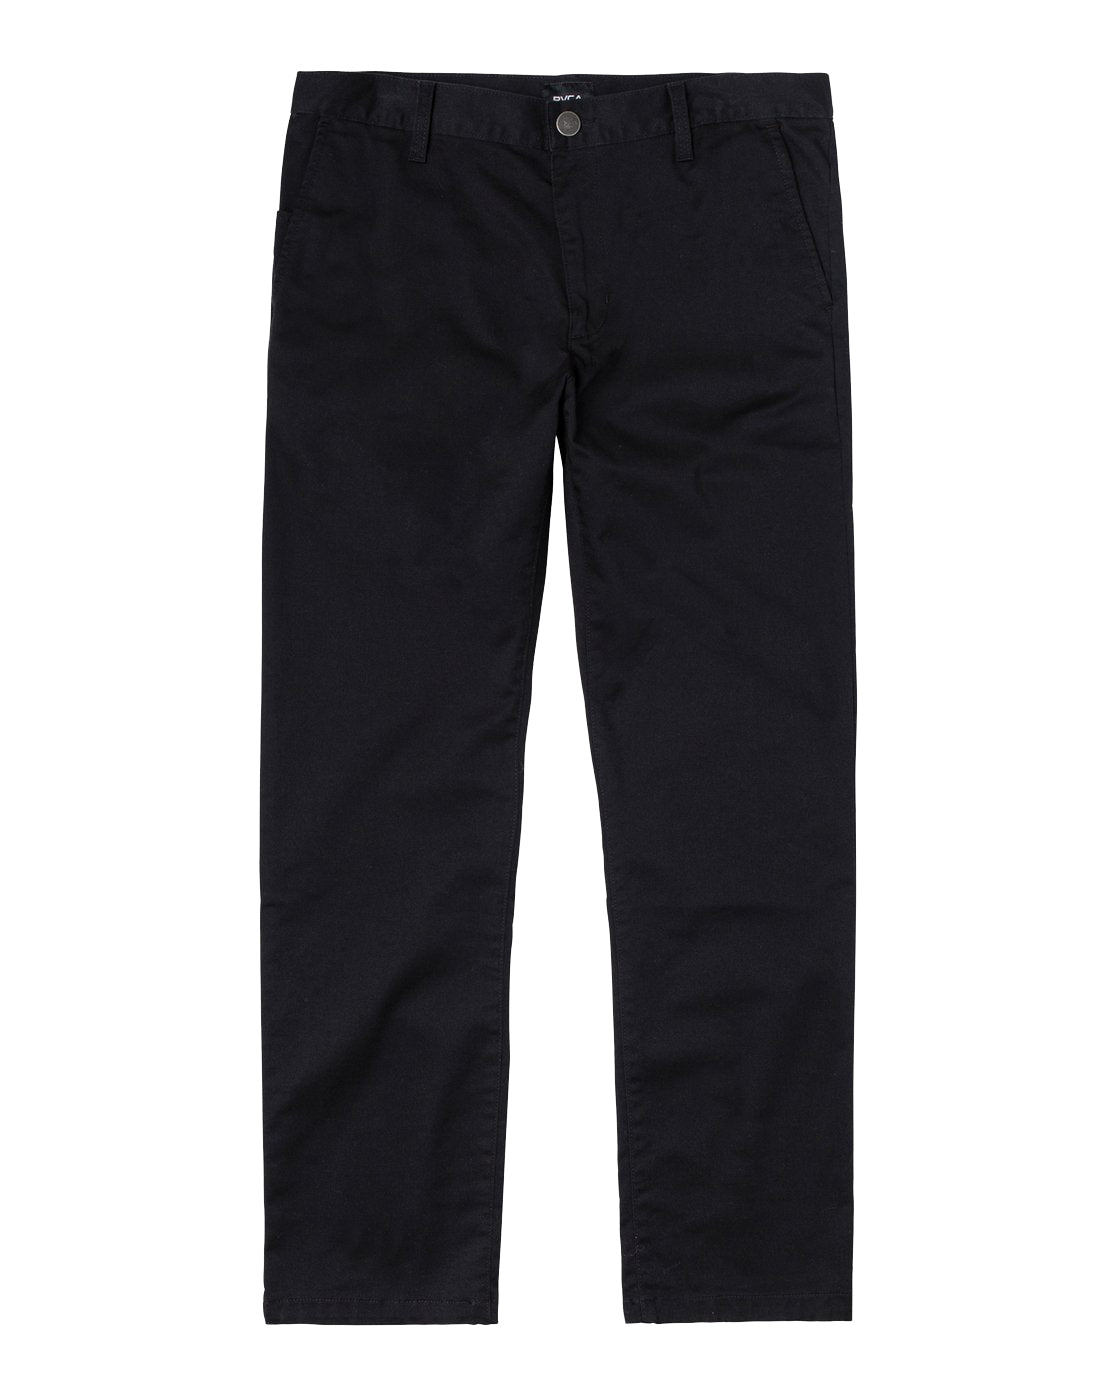 RVCA Weekend Stretch Straight Fit Pant BLK 28